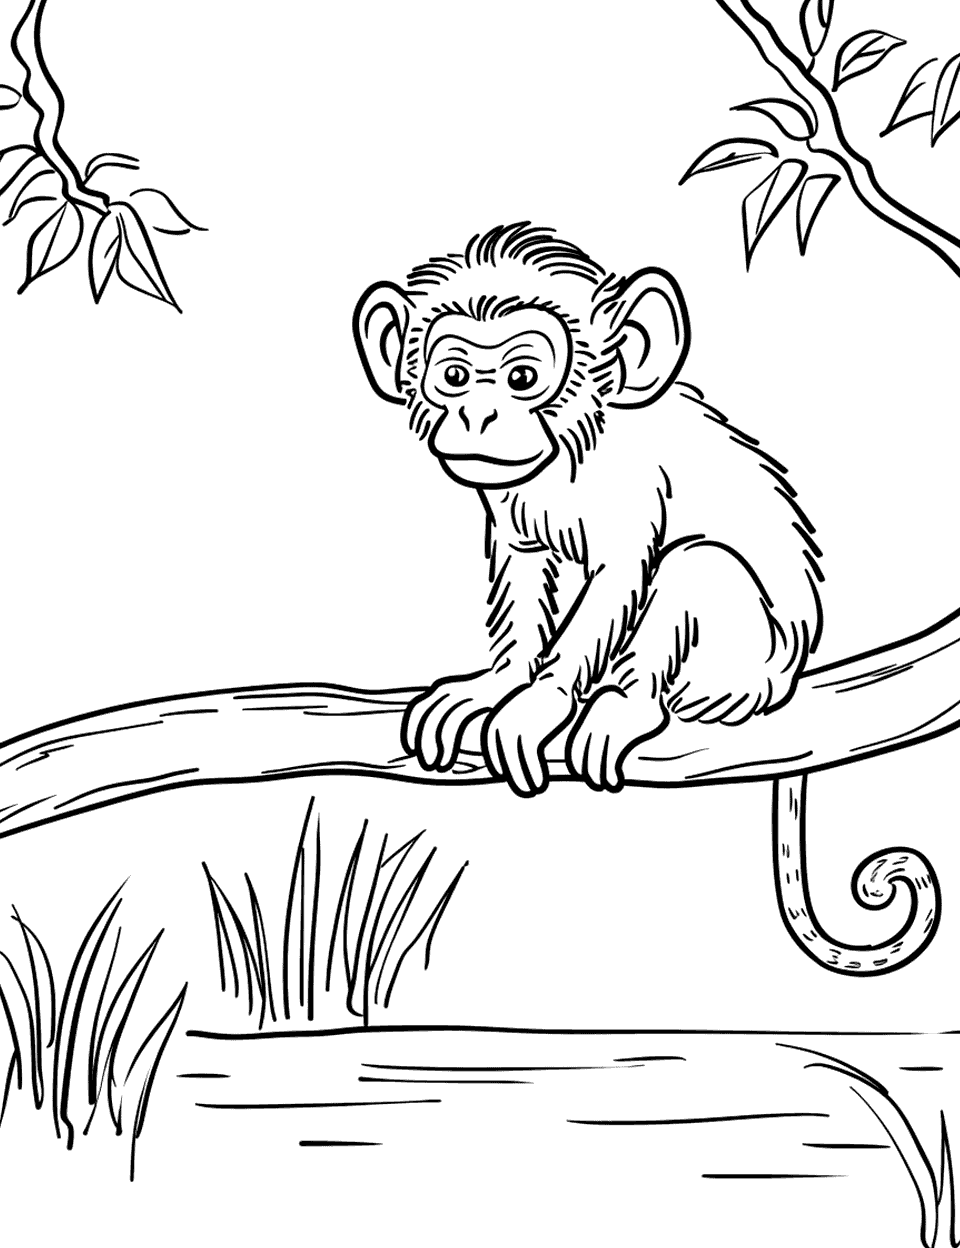 Monkey on a Branch Over Water Coloring Page - A monkey sitting on a branch that extends over a small pond.